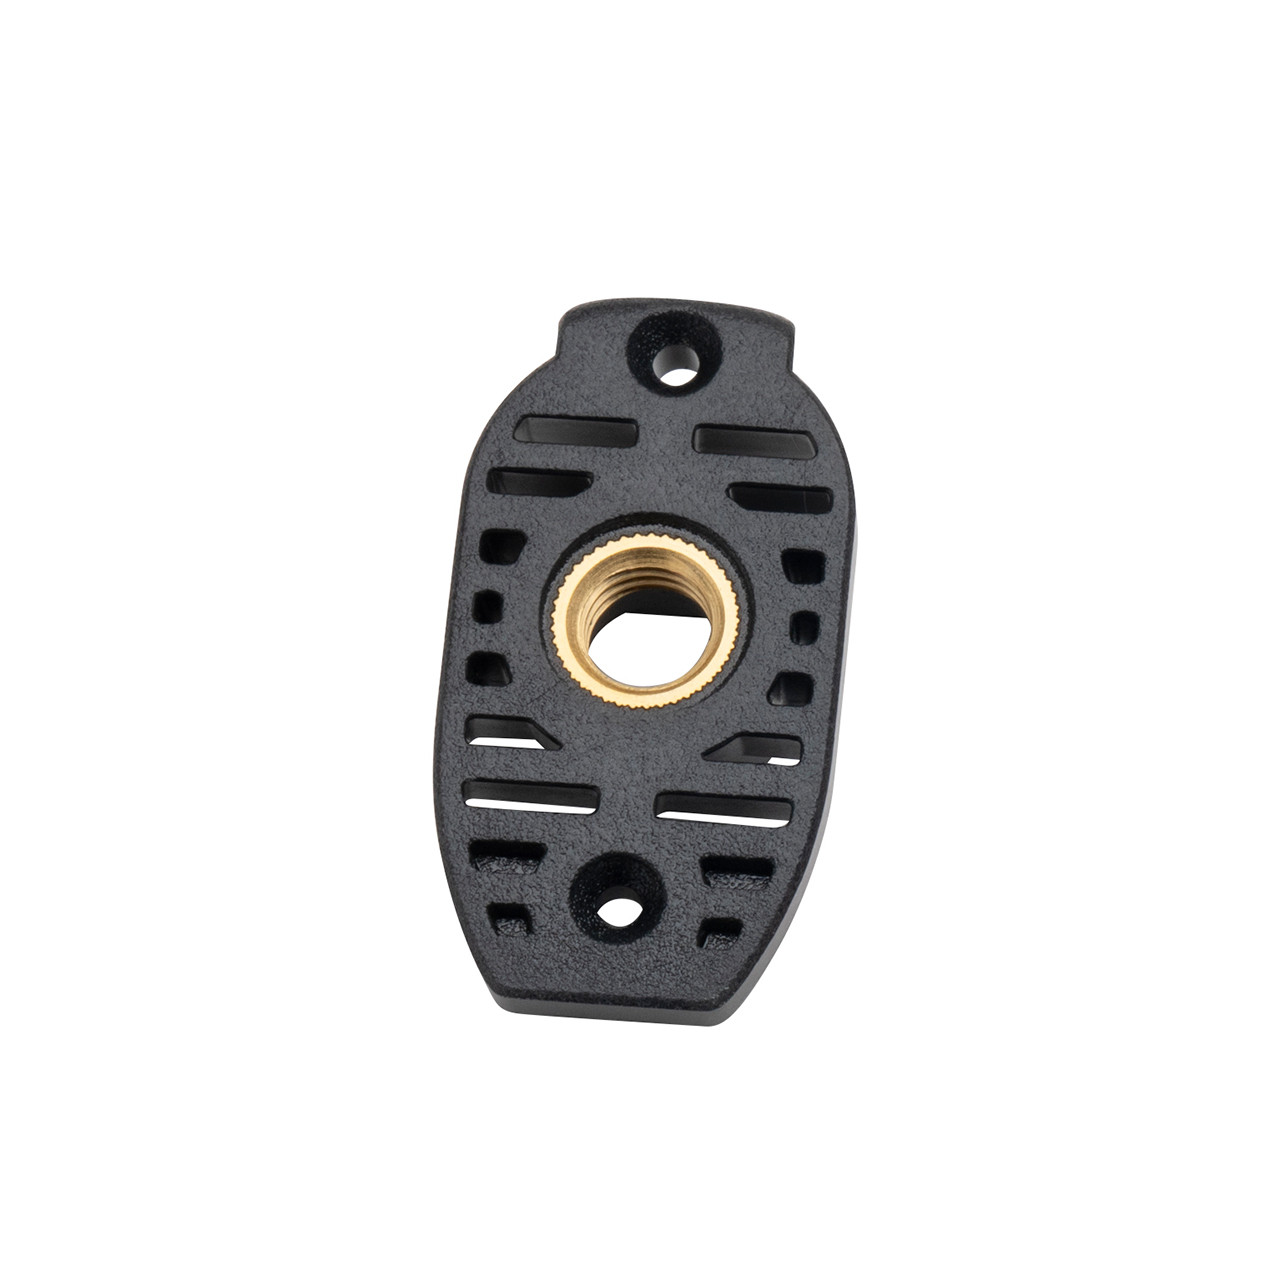 Shop Trident Mk2 Motor Plate - $ 6.5 - Krytac.com | For Airsoft Use Only.